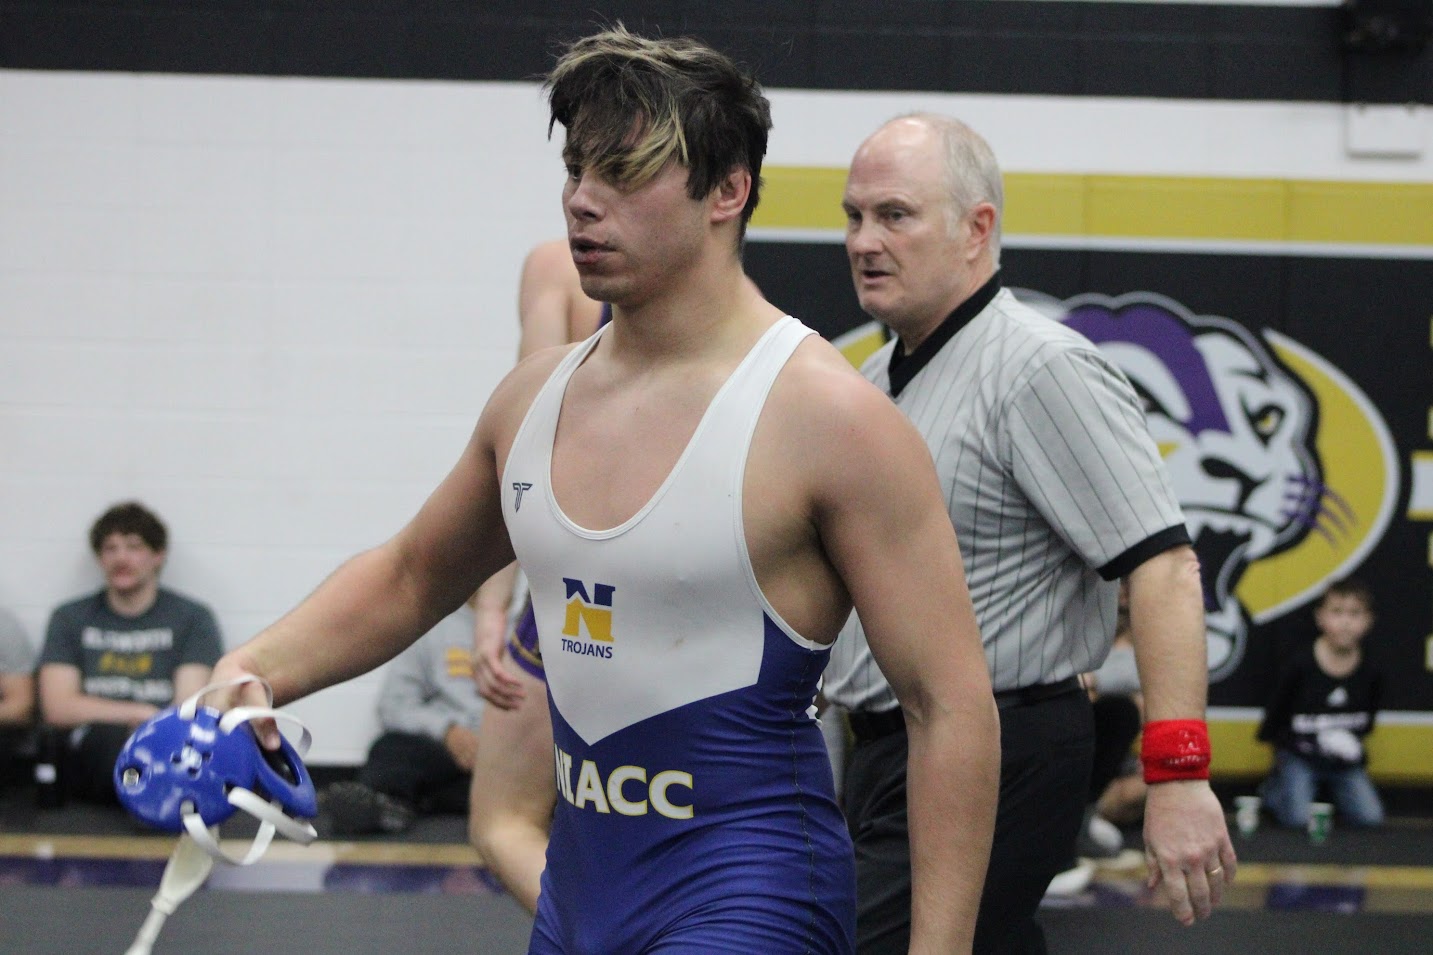 NIACC's Ein Carlos after claiming the district title at 184 pounds in Iowa Falls.